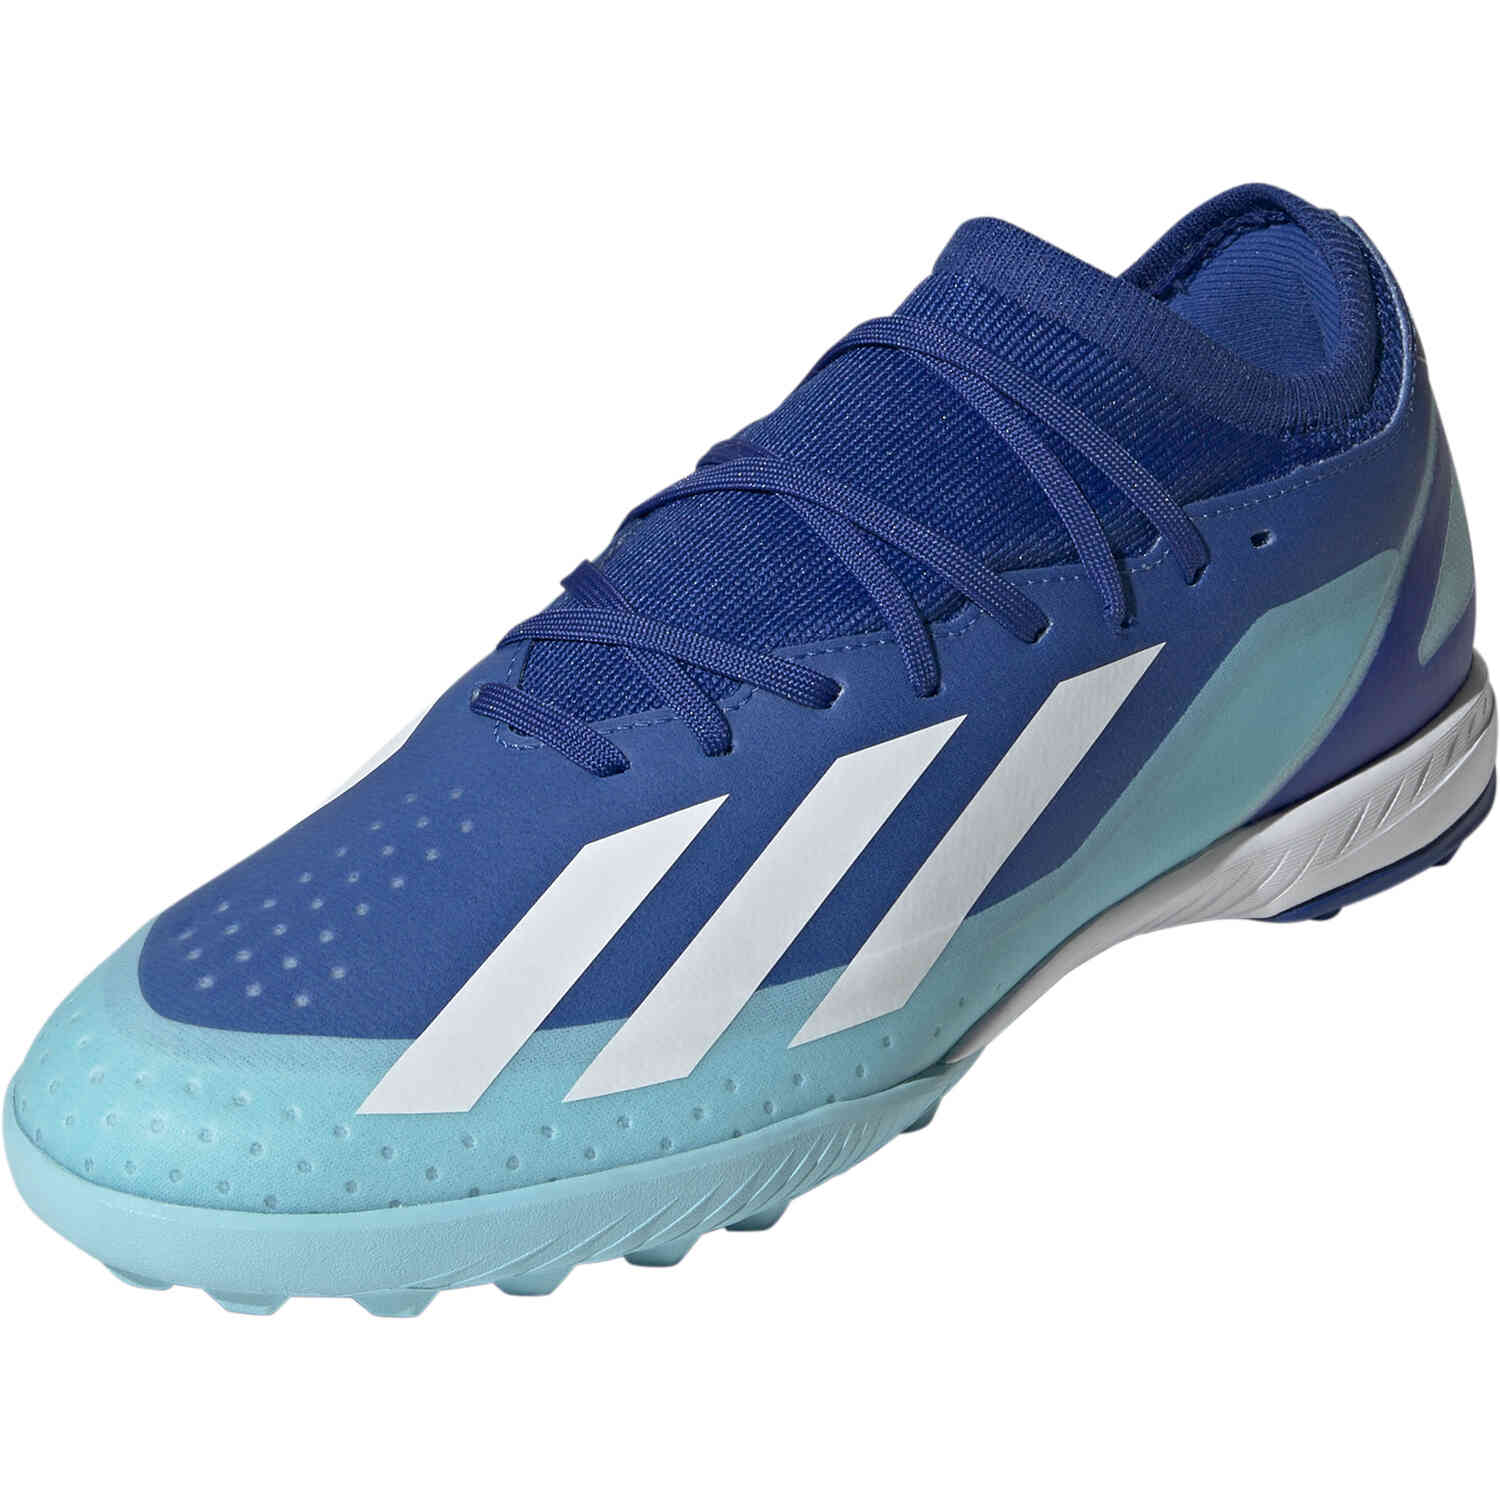 Master Soccer Bright TF Turf X White Soccer - Crazyfast.3 - adidas & Royal, Red Shoes Solar